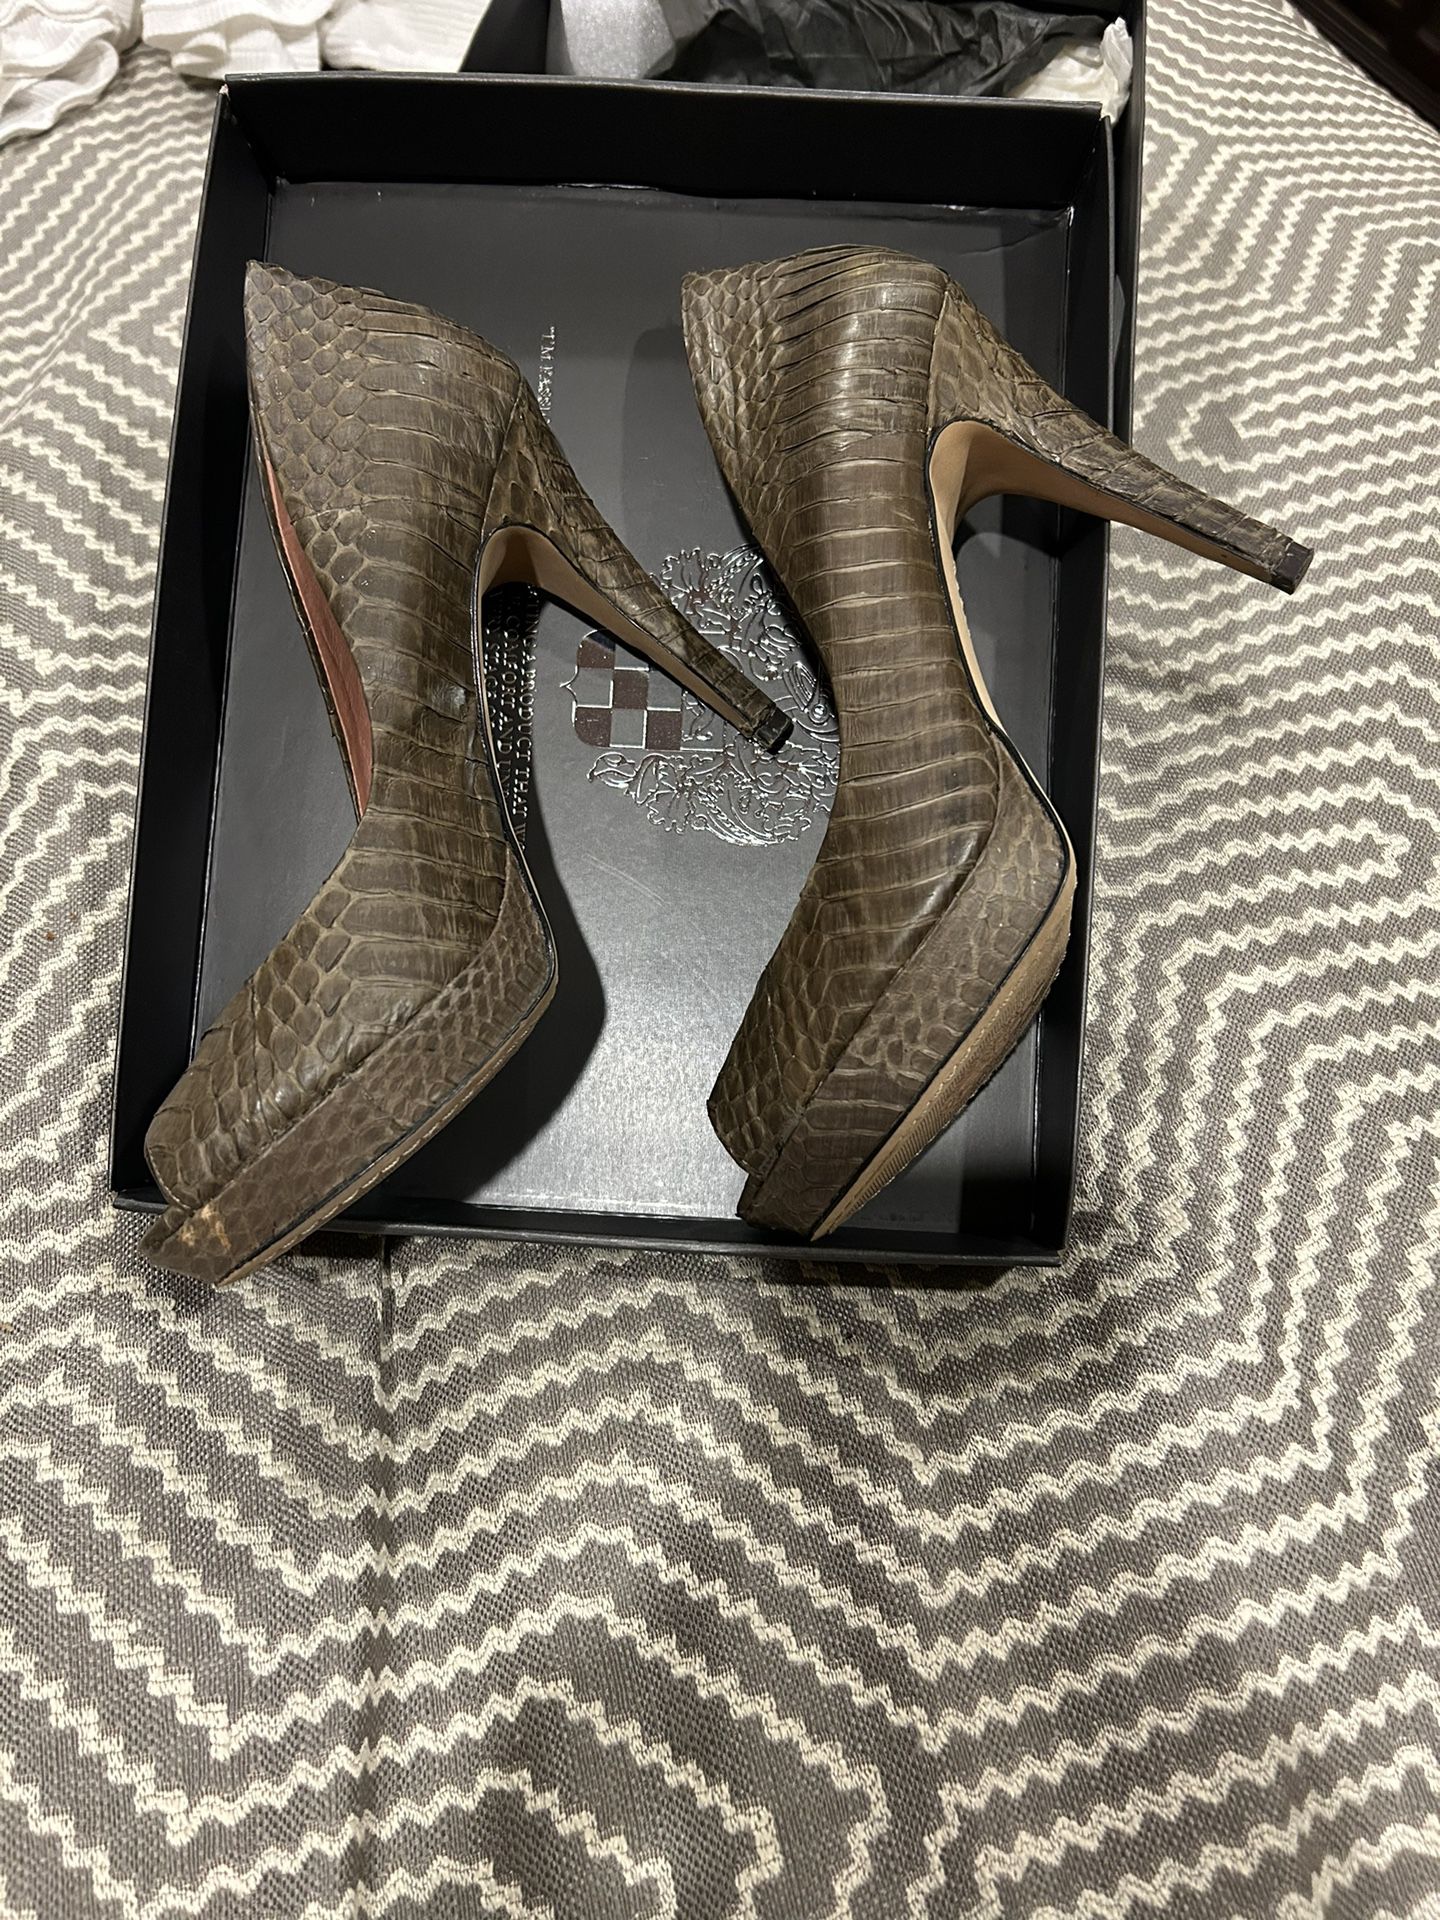 Vince Camuto Army Green Snake Print Heels - Size 9M